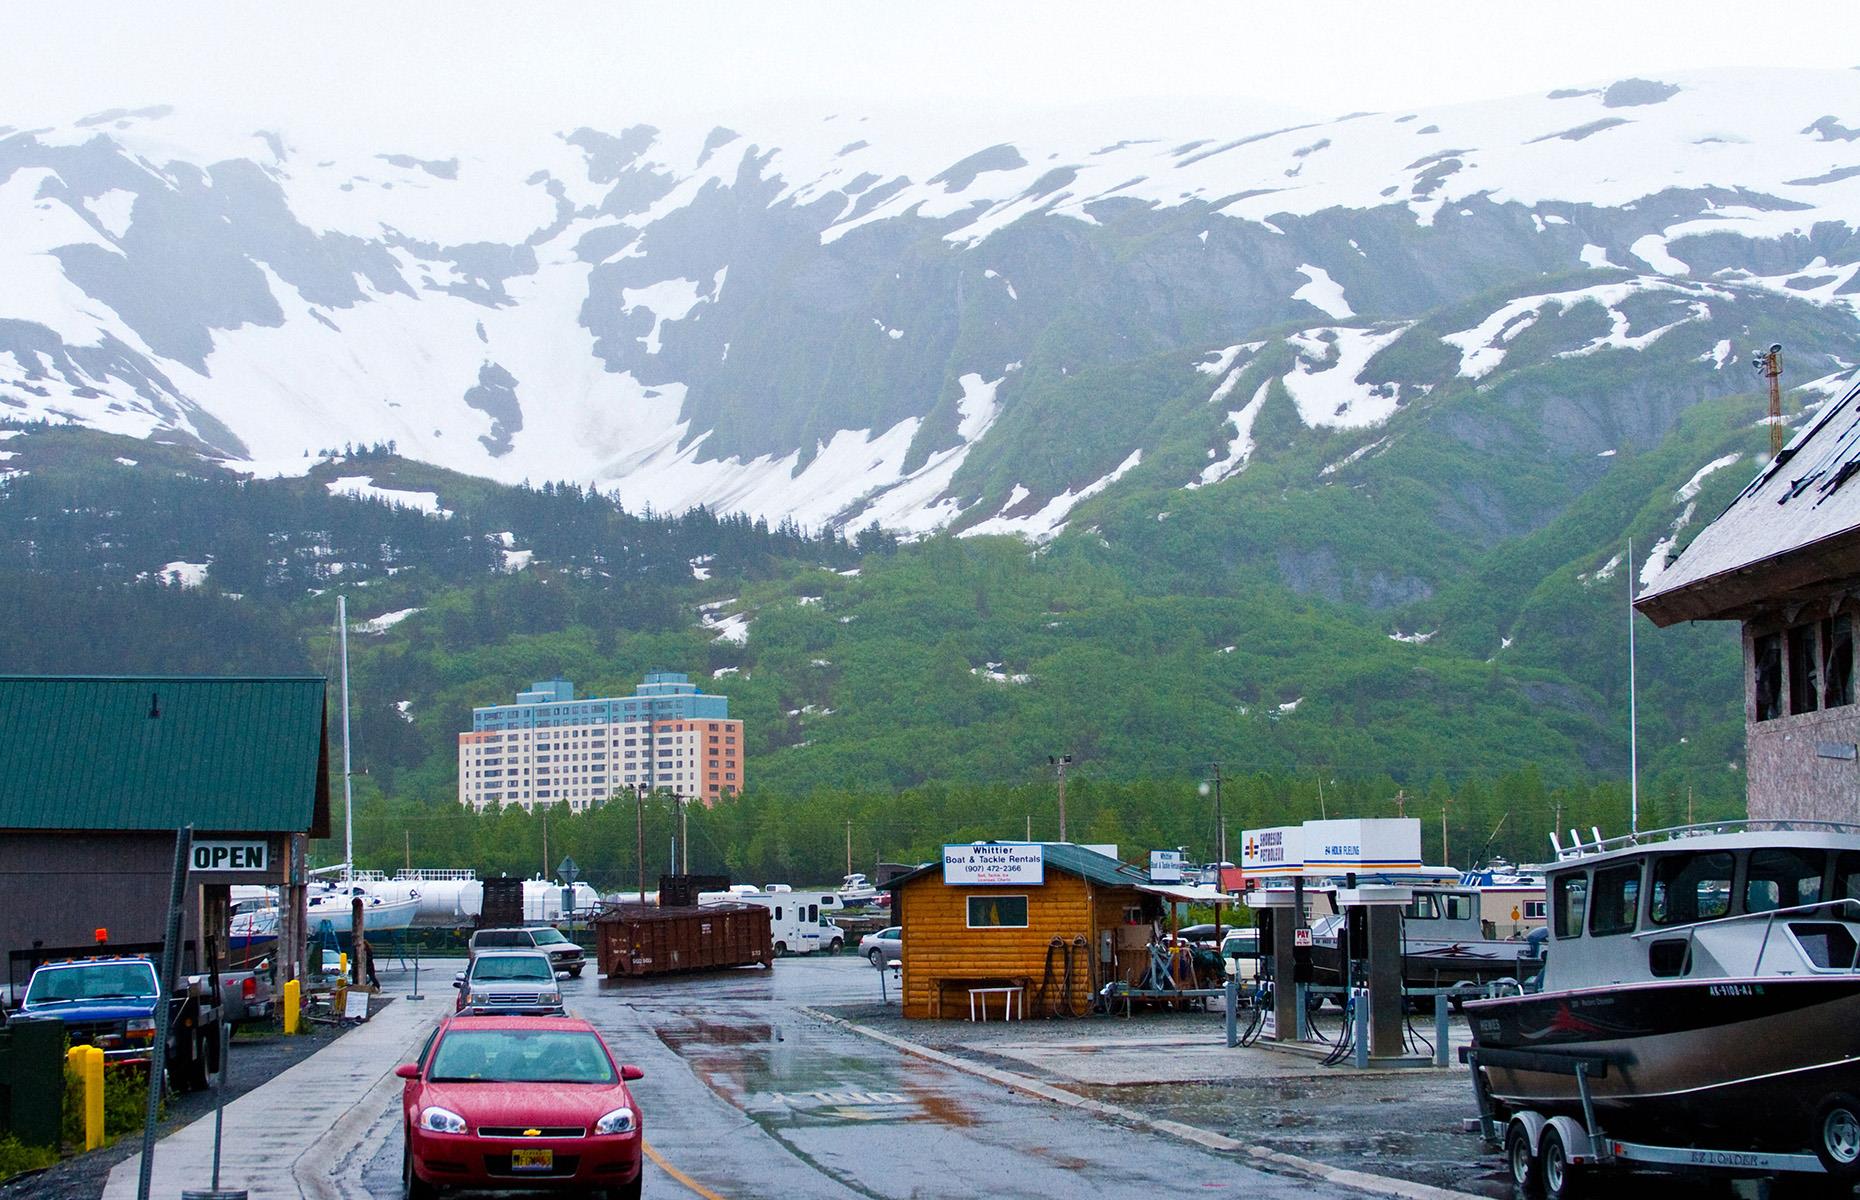 <p>However, while isolated, Whittier offers residents everything they need, not just contained in one town, but in one building. The 14-storey Begich Towers Incorporated, known locally simply as the BTI, may seem like a bit of a blot on the winter wonderland-eque landscape, but <a href="https://nypost.com/2023/06/08/in-this-alaska-town-everyone-lives-under-one-roof/">reportedly</a> almost all of the 200-odd Whittierites, it’s home…as well as the local hospital, school, police station, grocery store, church, post office, and city council headquarters!</p>